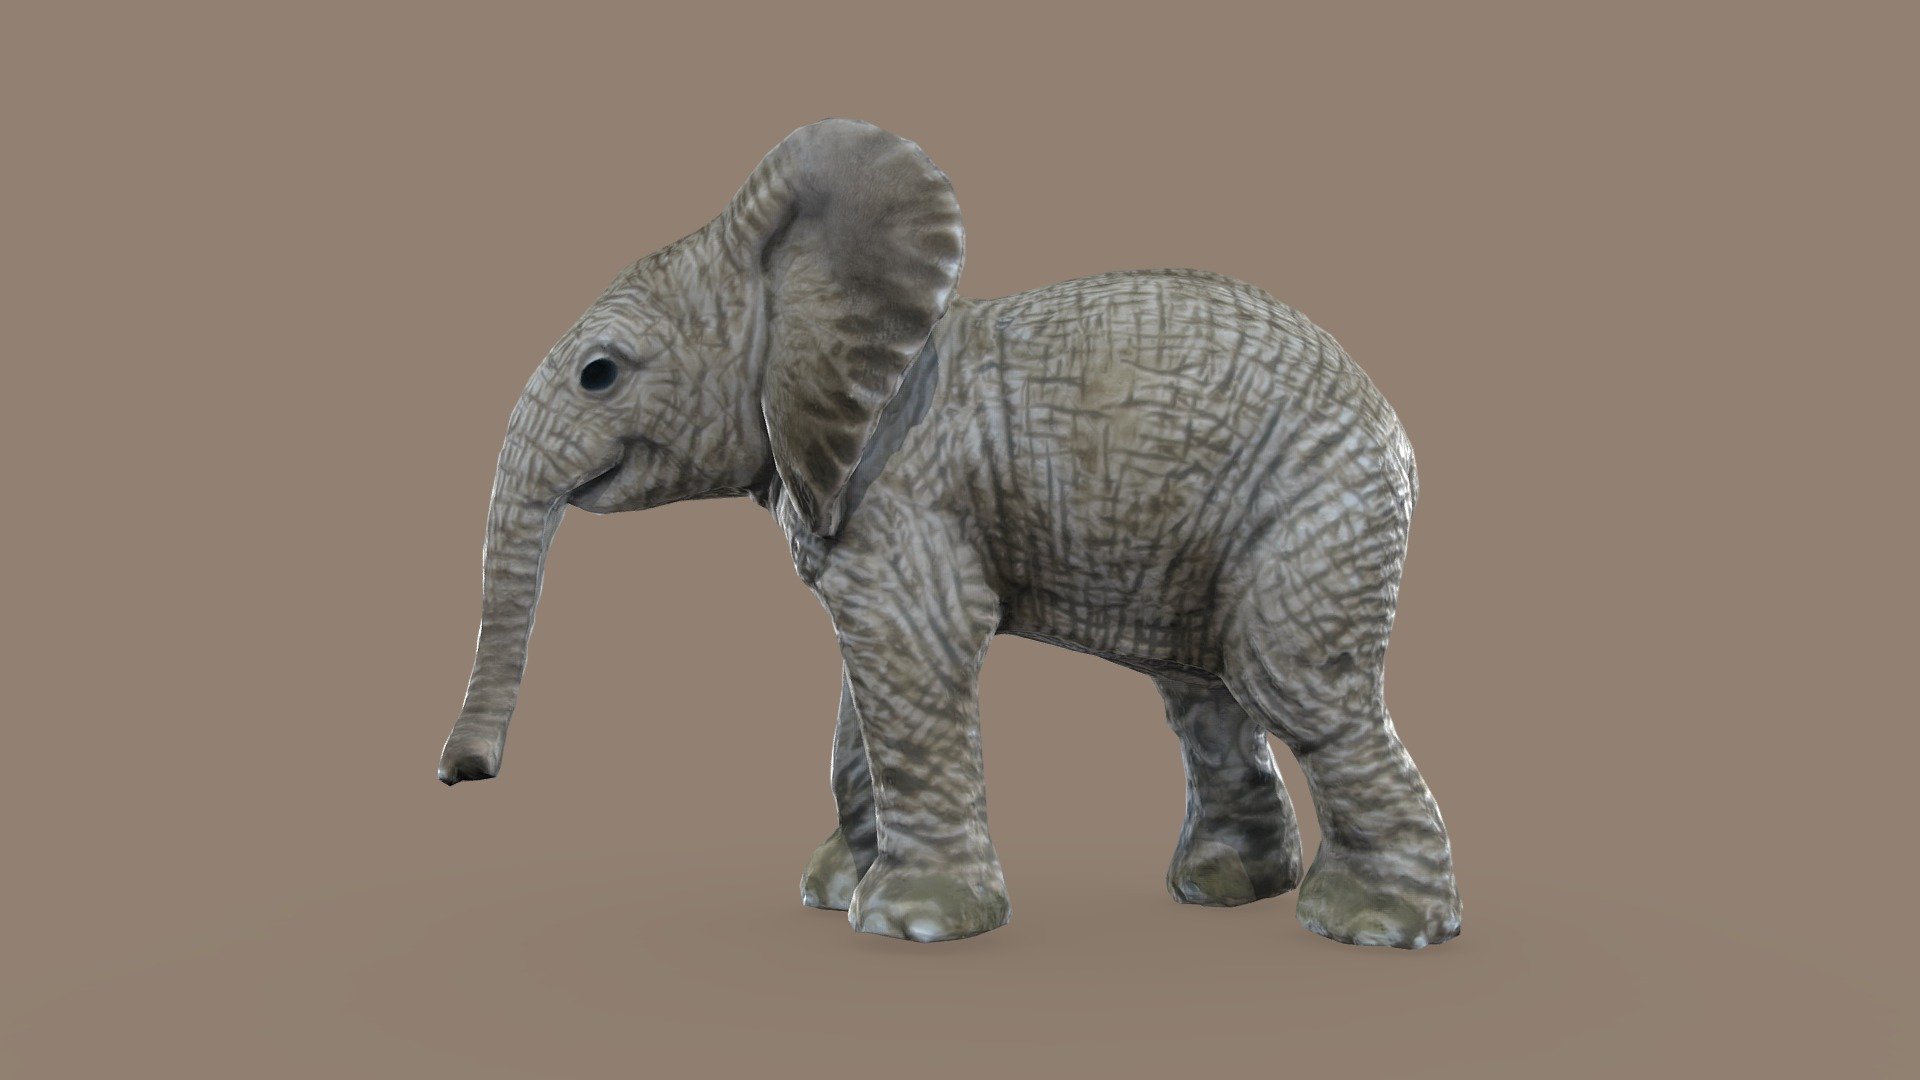 My entry to this competition! https://sketchfab.com/blogs/community/sketchfab-march-challenge-favorite-toy

We have lots of these tiny toy animals in our house - great fun stacking them, playing with them in the dolls house, bathtub etc. :) This elephant is about 10cm long.

2.4 million face model &gt; 5,000 faces + normal map all created in RealityCapture by Capturing Reality from 84 images in 00h:24m:54s 3d model